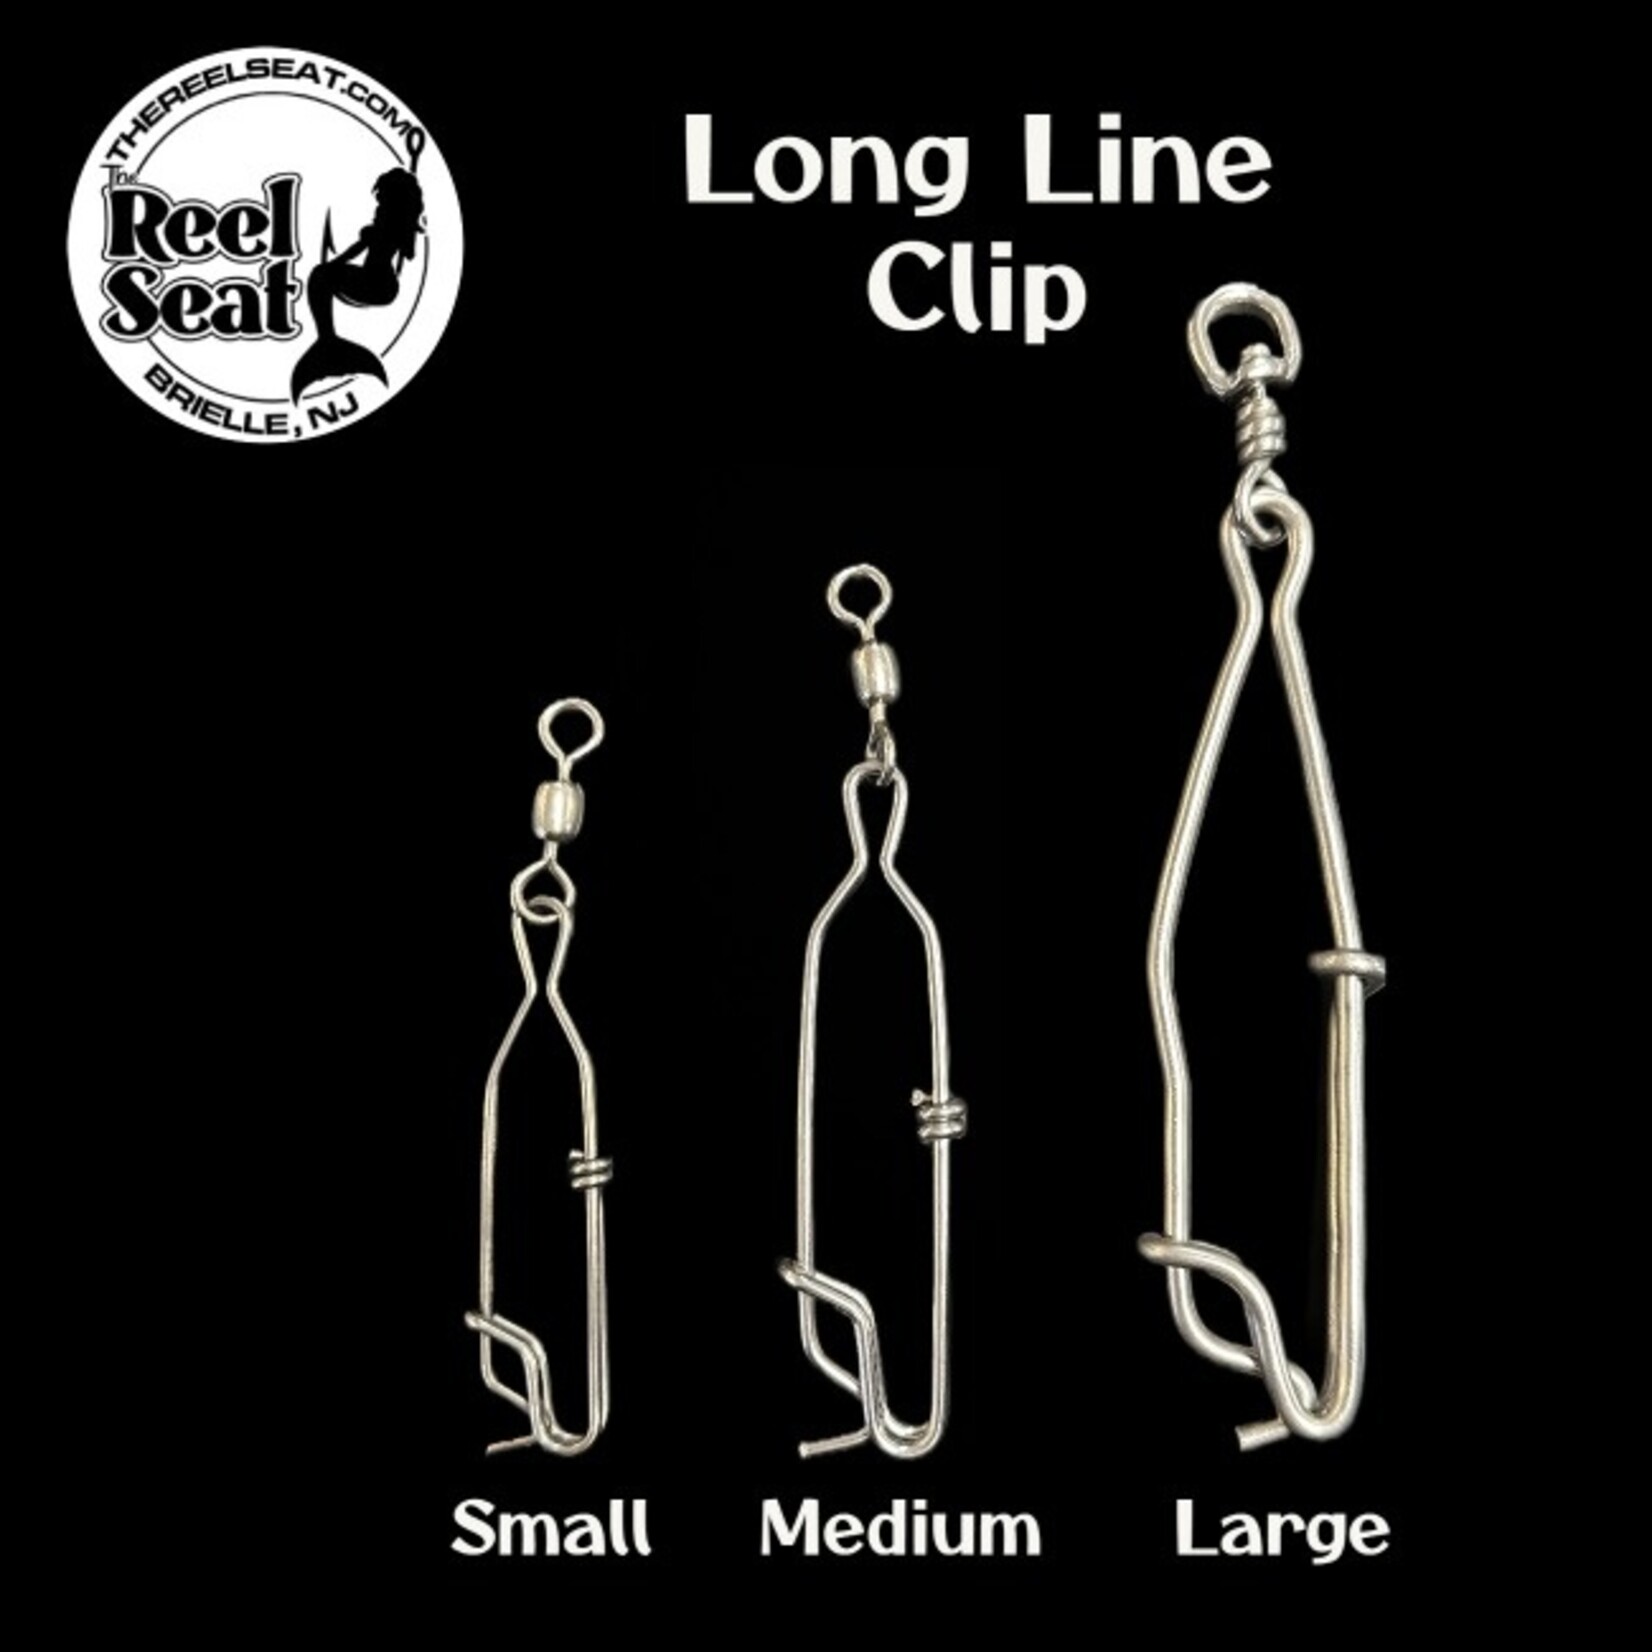 The Reel Seat RS Long Line Clips